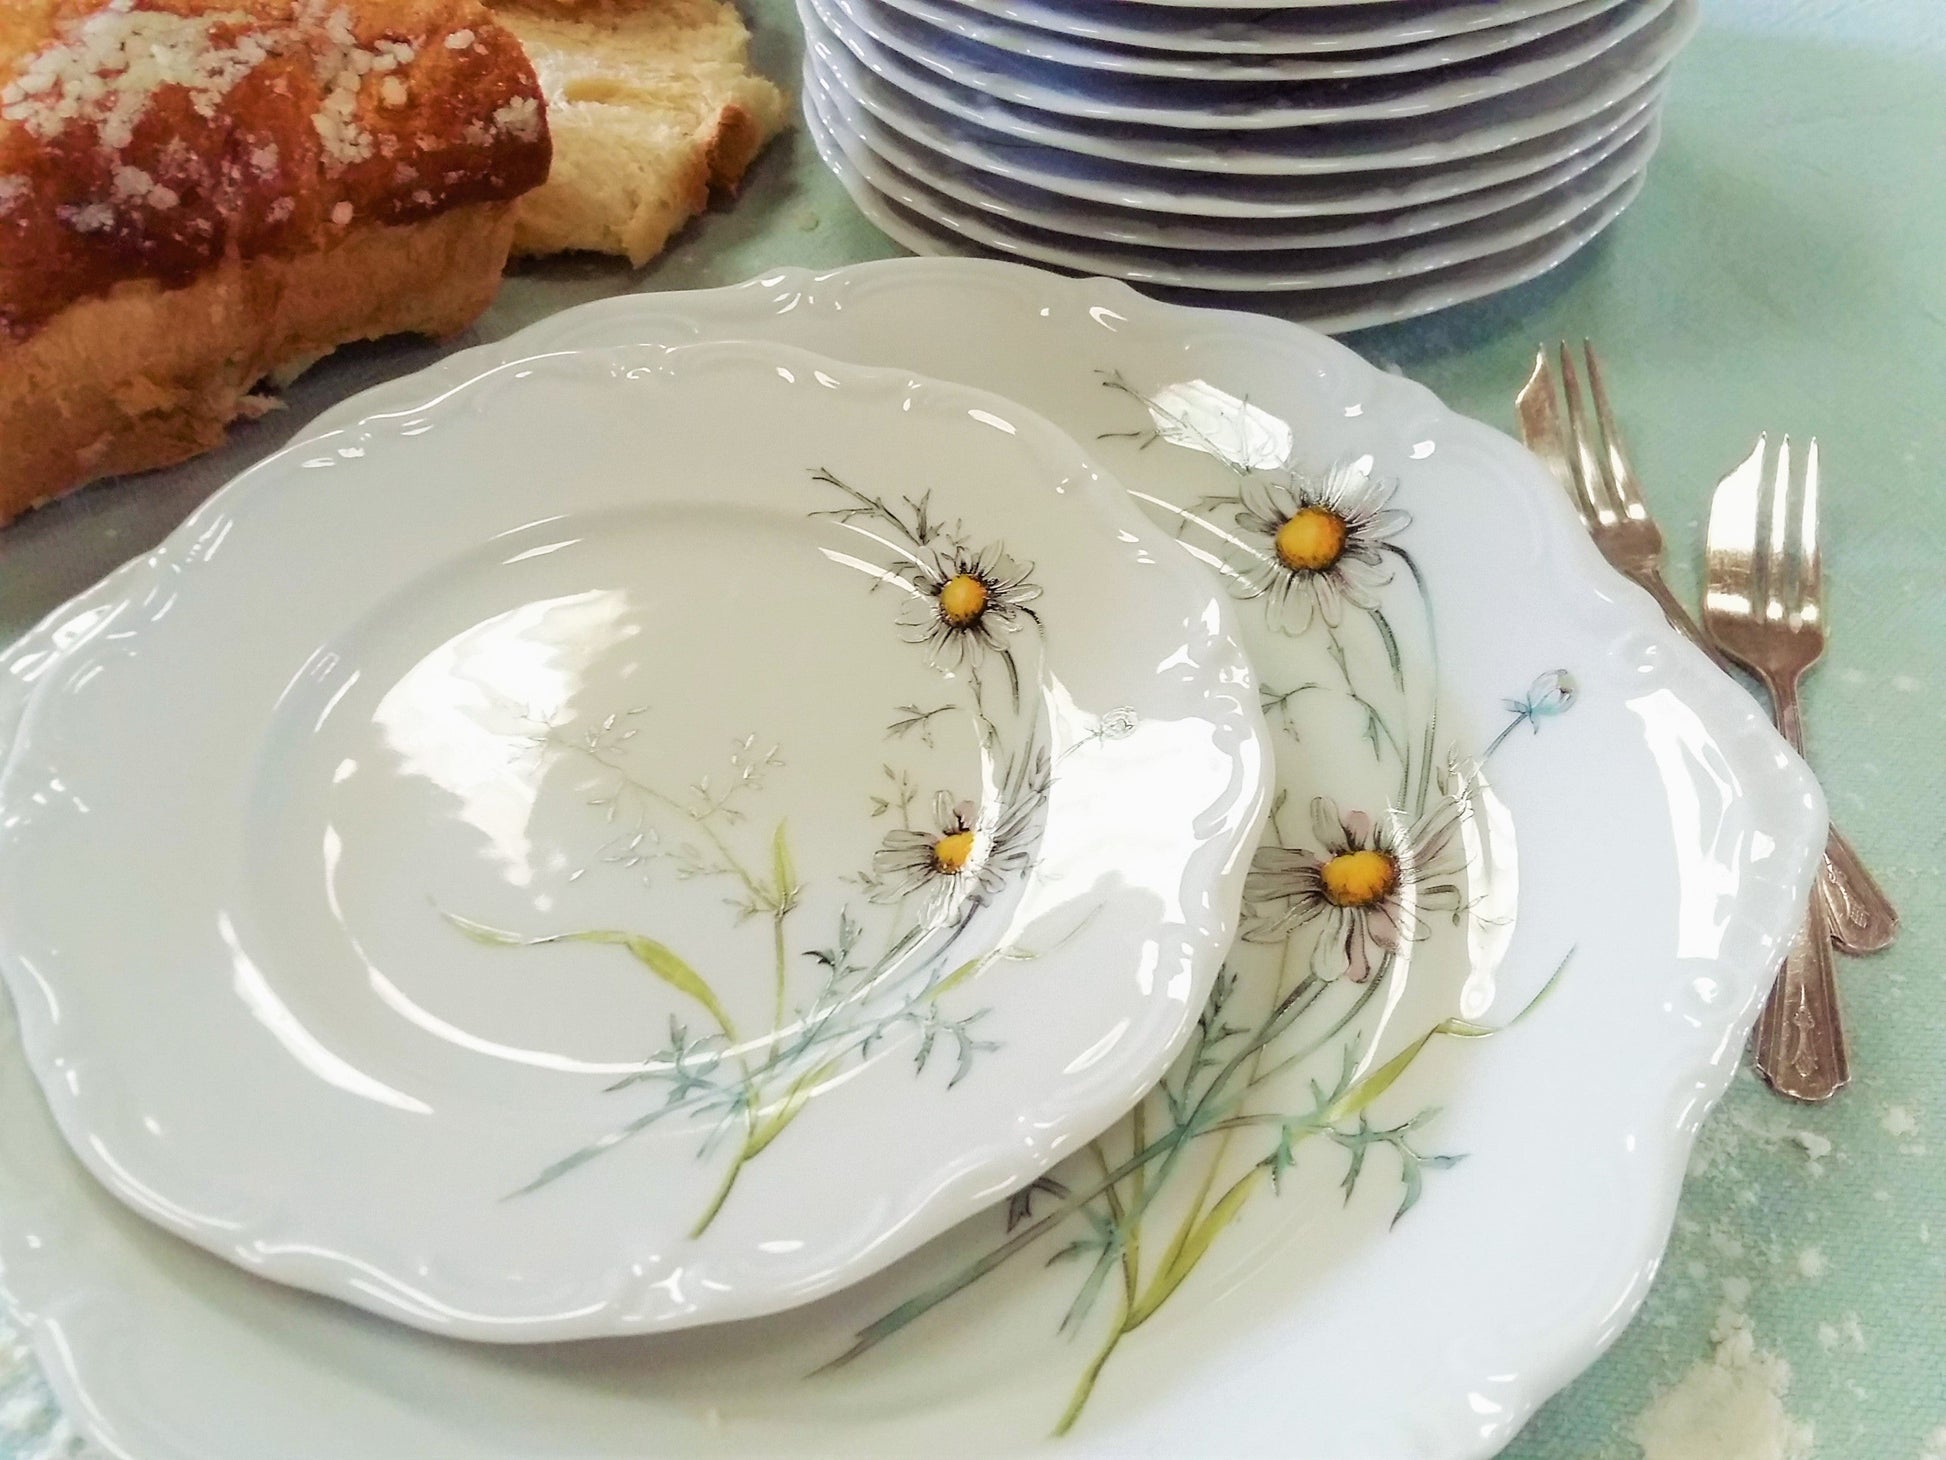 TEN "Daisy" Tea Plates & Platter by "Winterling Roslau, Bavaria." from Tiggy & Pip - €180.00! Shop now at Tiggy and Pip